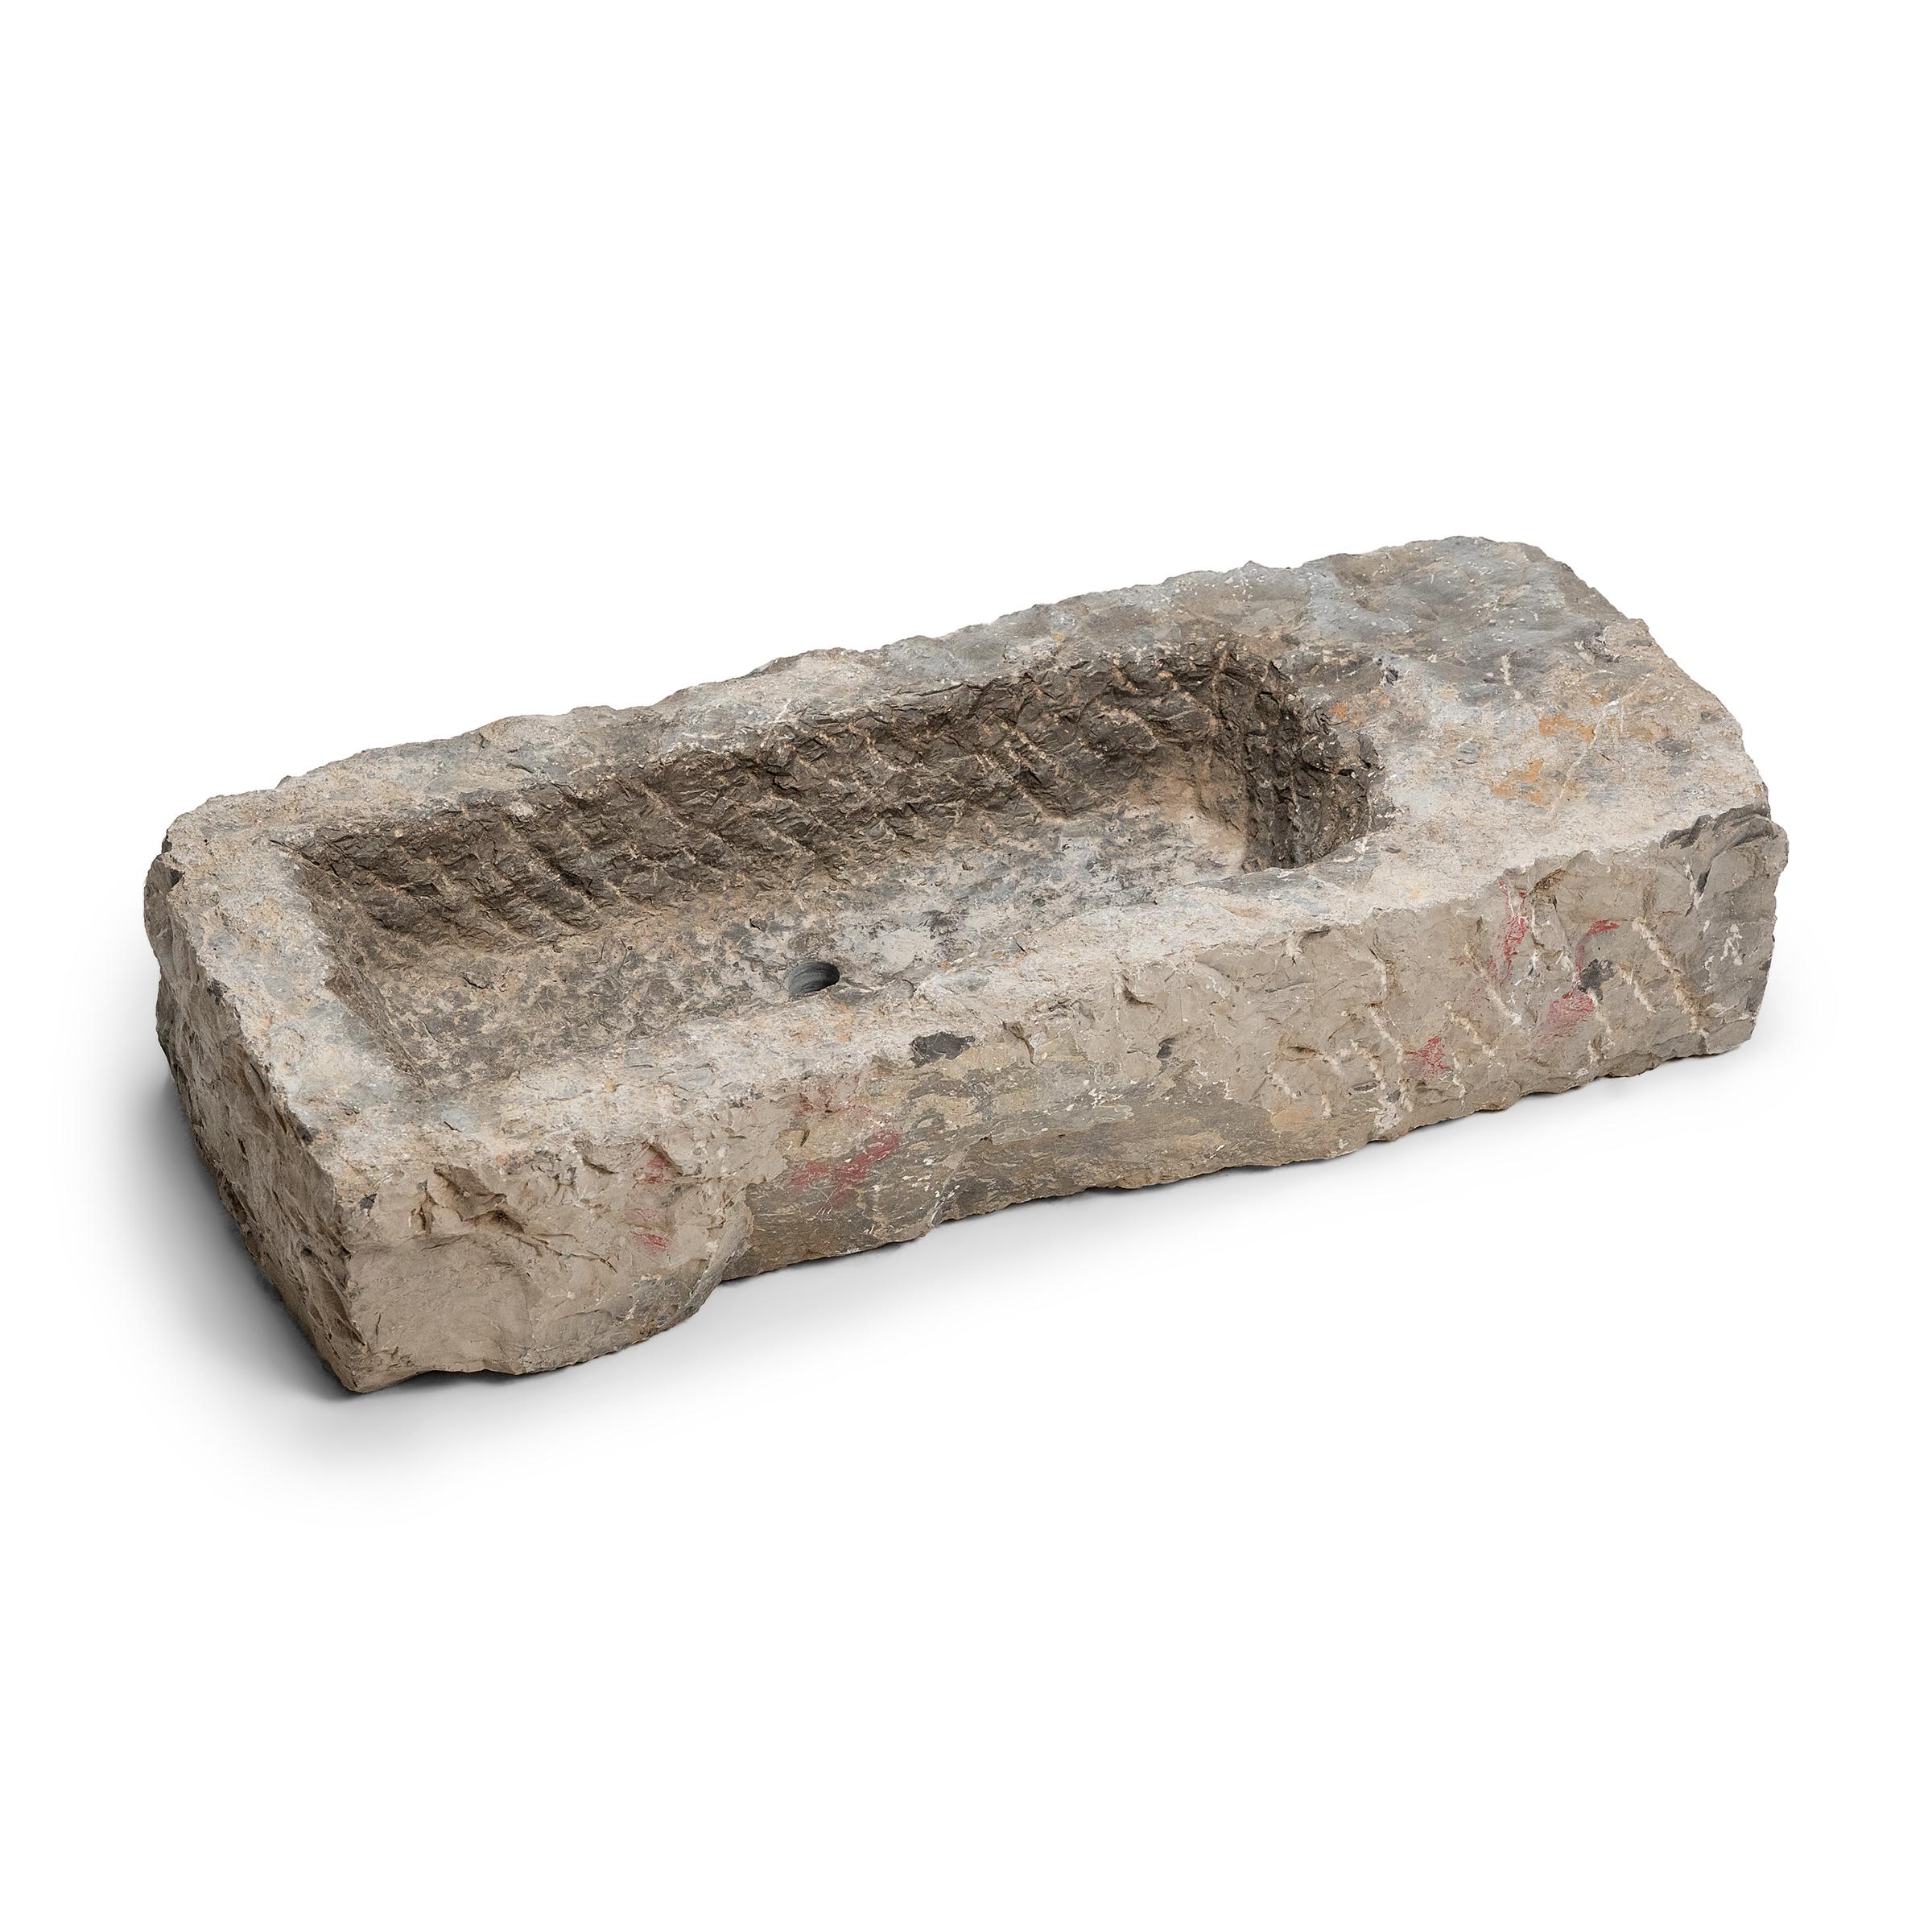 Once used on a provincial Chinese farm to hold water or animal feed, this early 19th-century stone trough is celebrated today for its organic form and rustic authenticity. Hand-carved from solid limestone, this rectangular trough has been carved